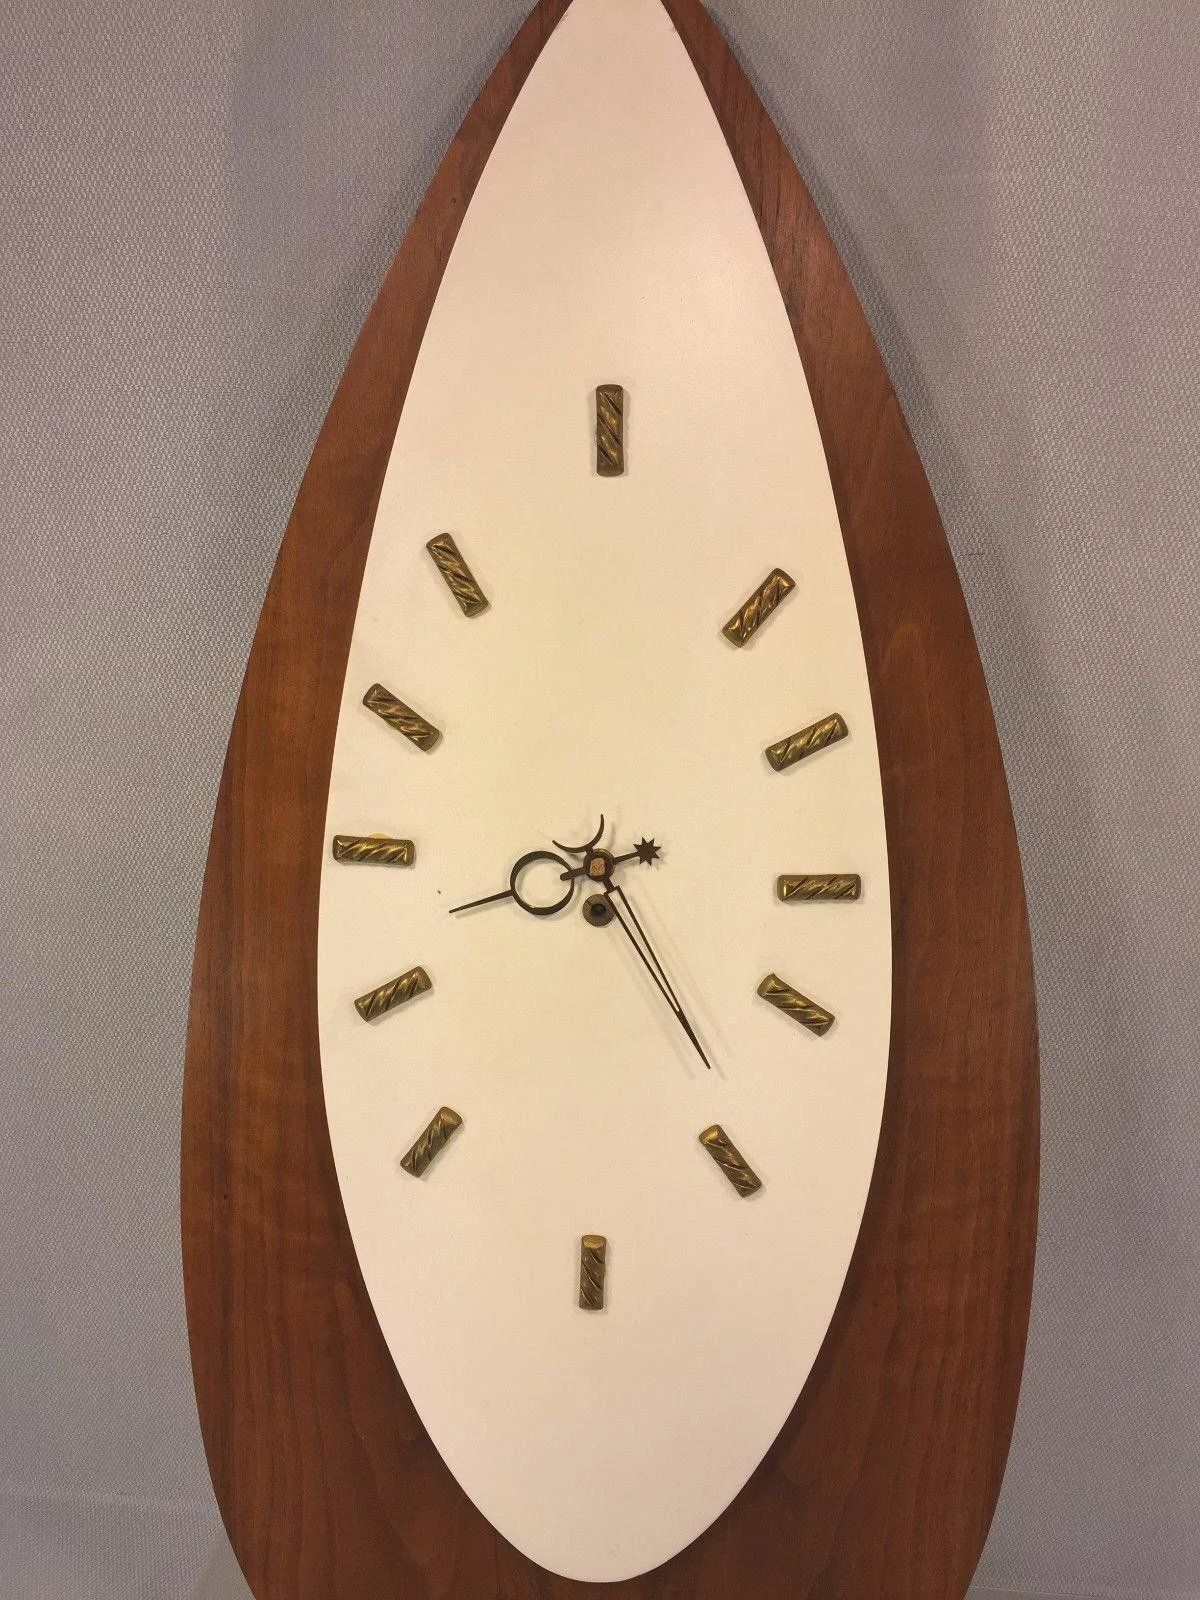 Vintage Modern Art Deco Duverdrey & Bloquel Wall Clock Runs Made Pertaining To Most Recently Released Art Deco Wall Clocks (View 9 of 15)